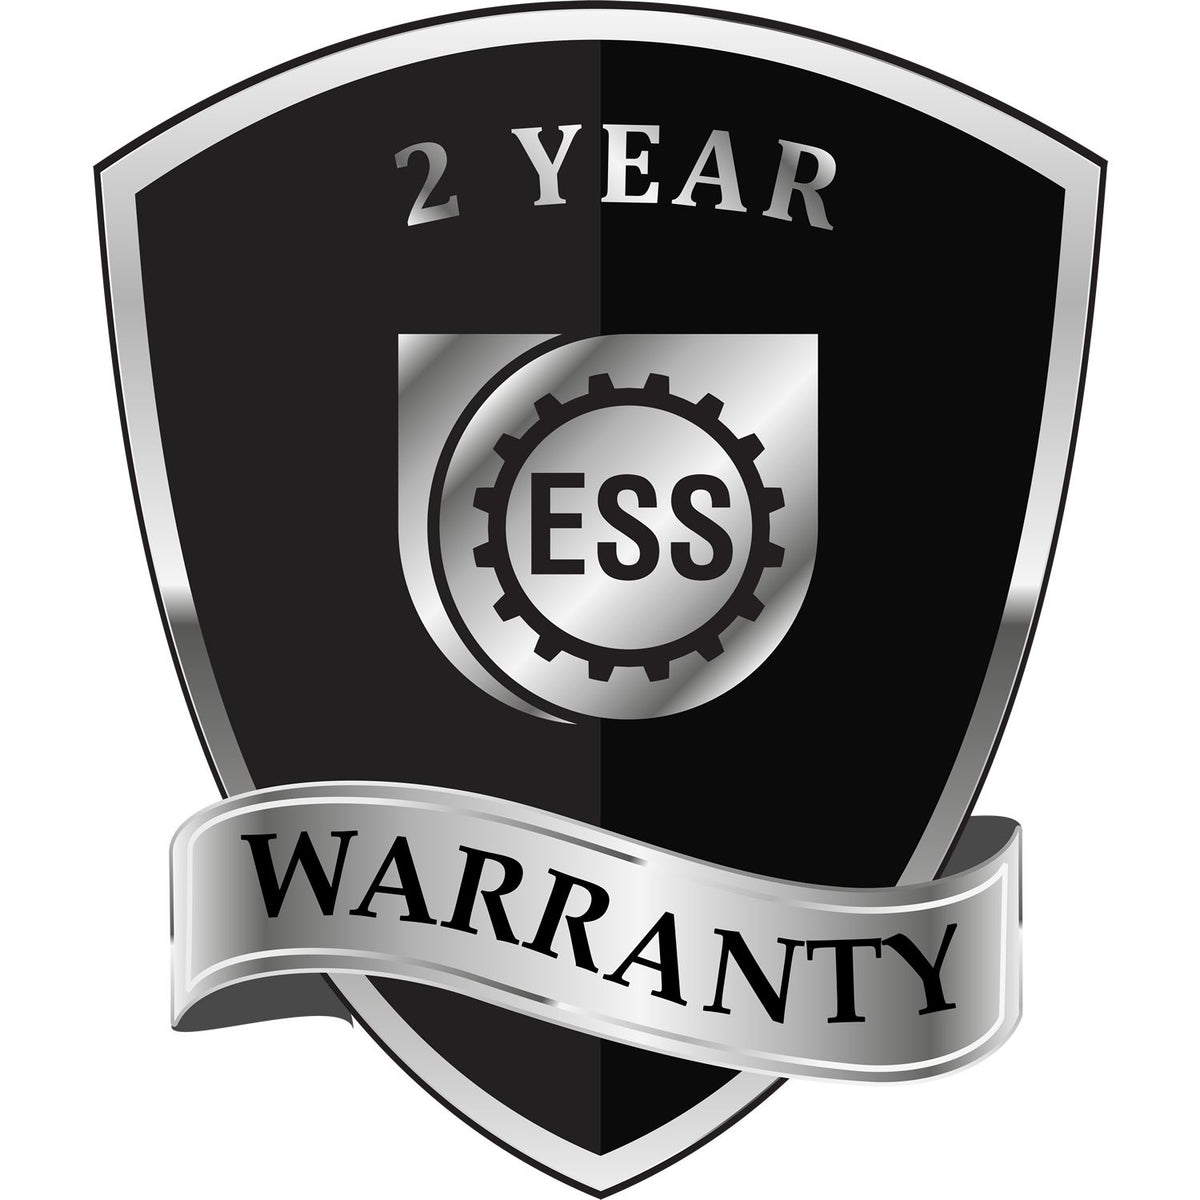 A black and silver badge or emblem showing warranty information for the Gift Arkansas Landscape Architect Seal